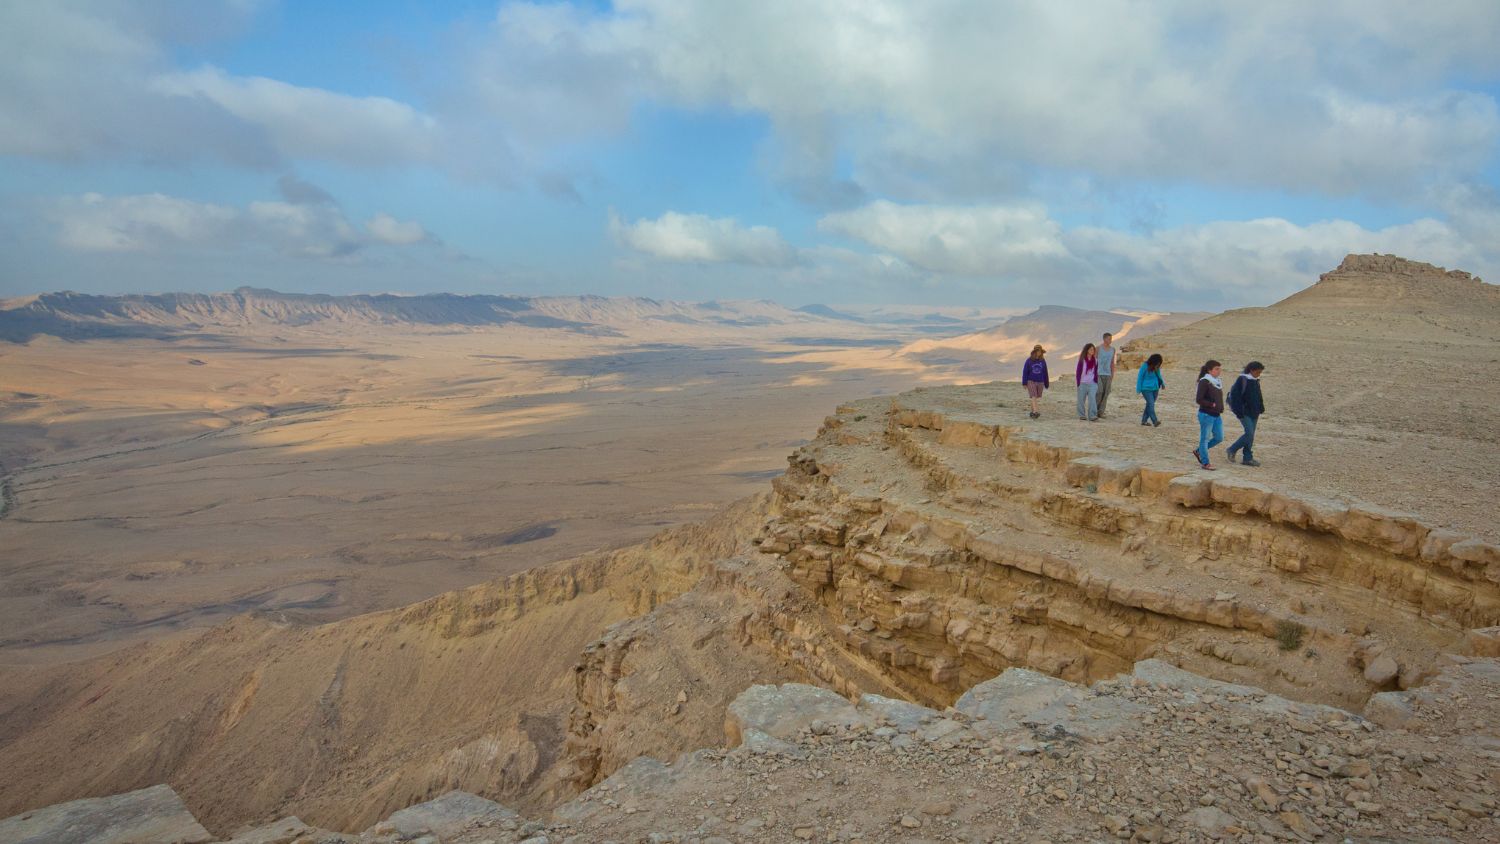 Where to Go Next: The Negev, Israel